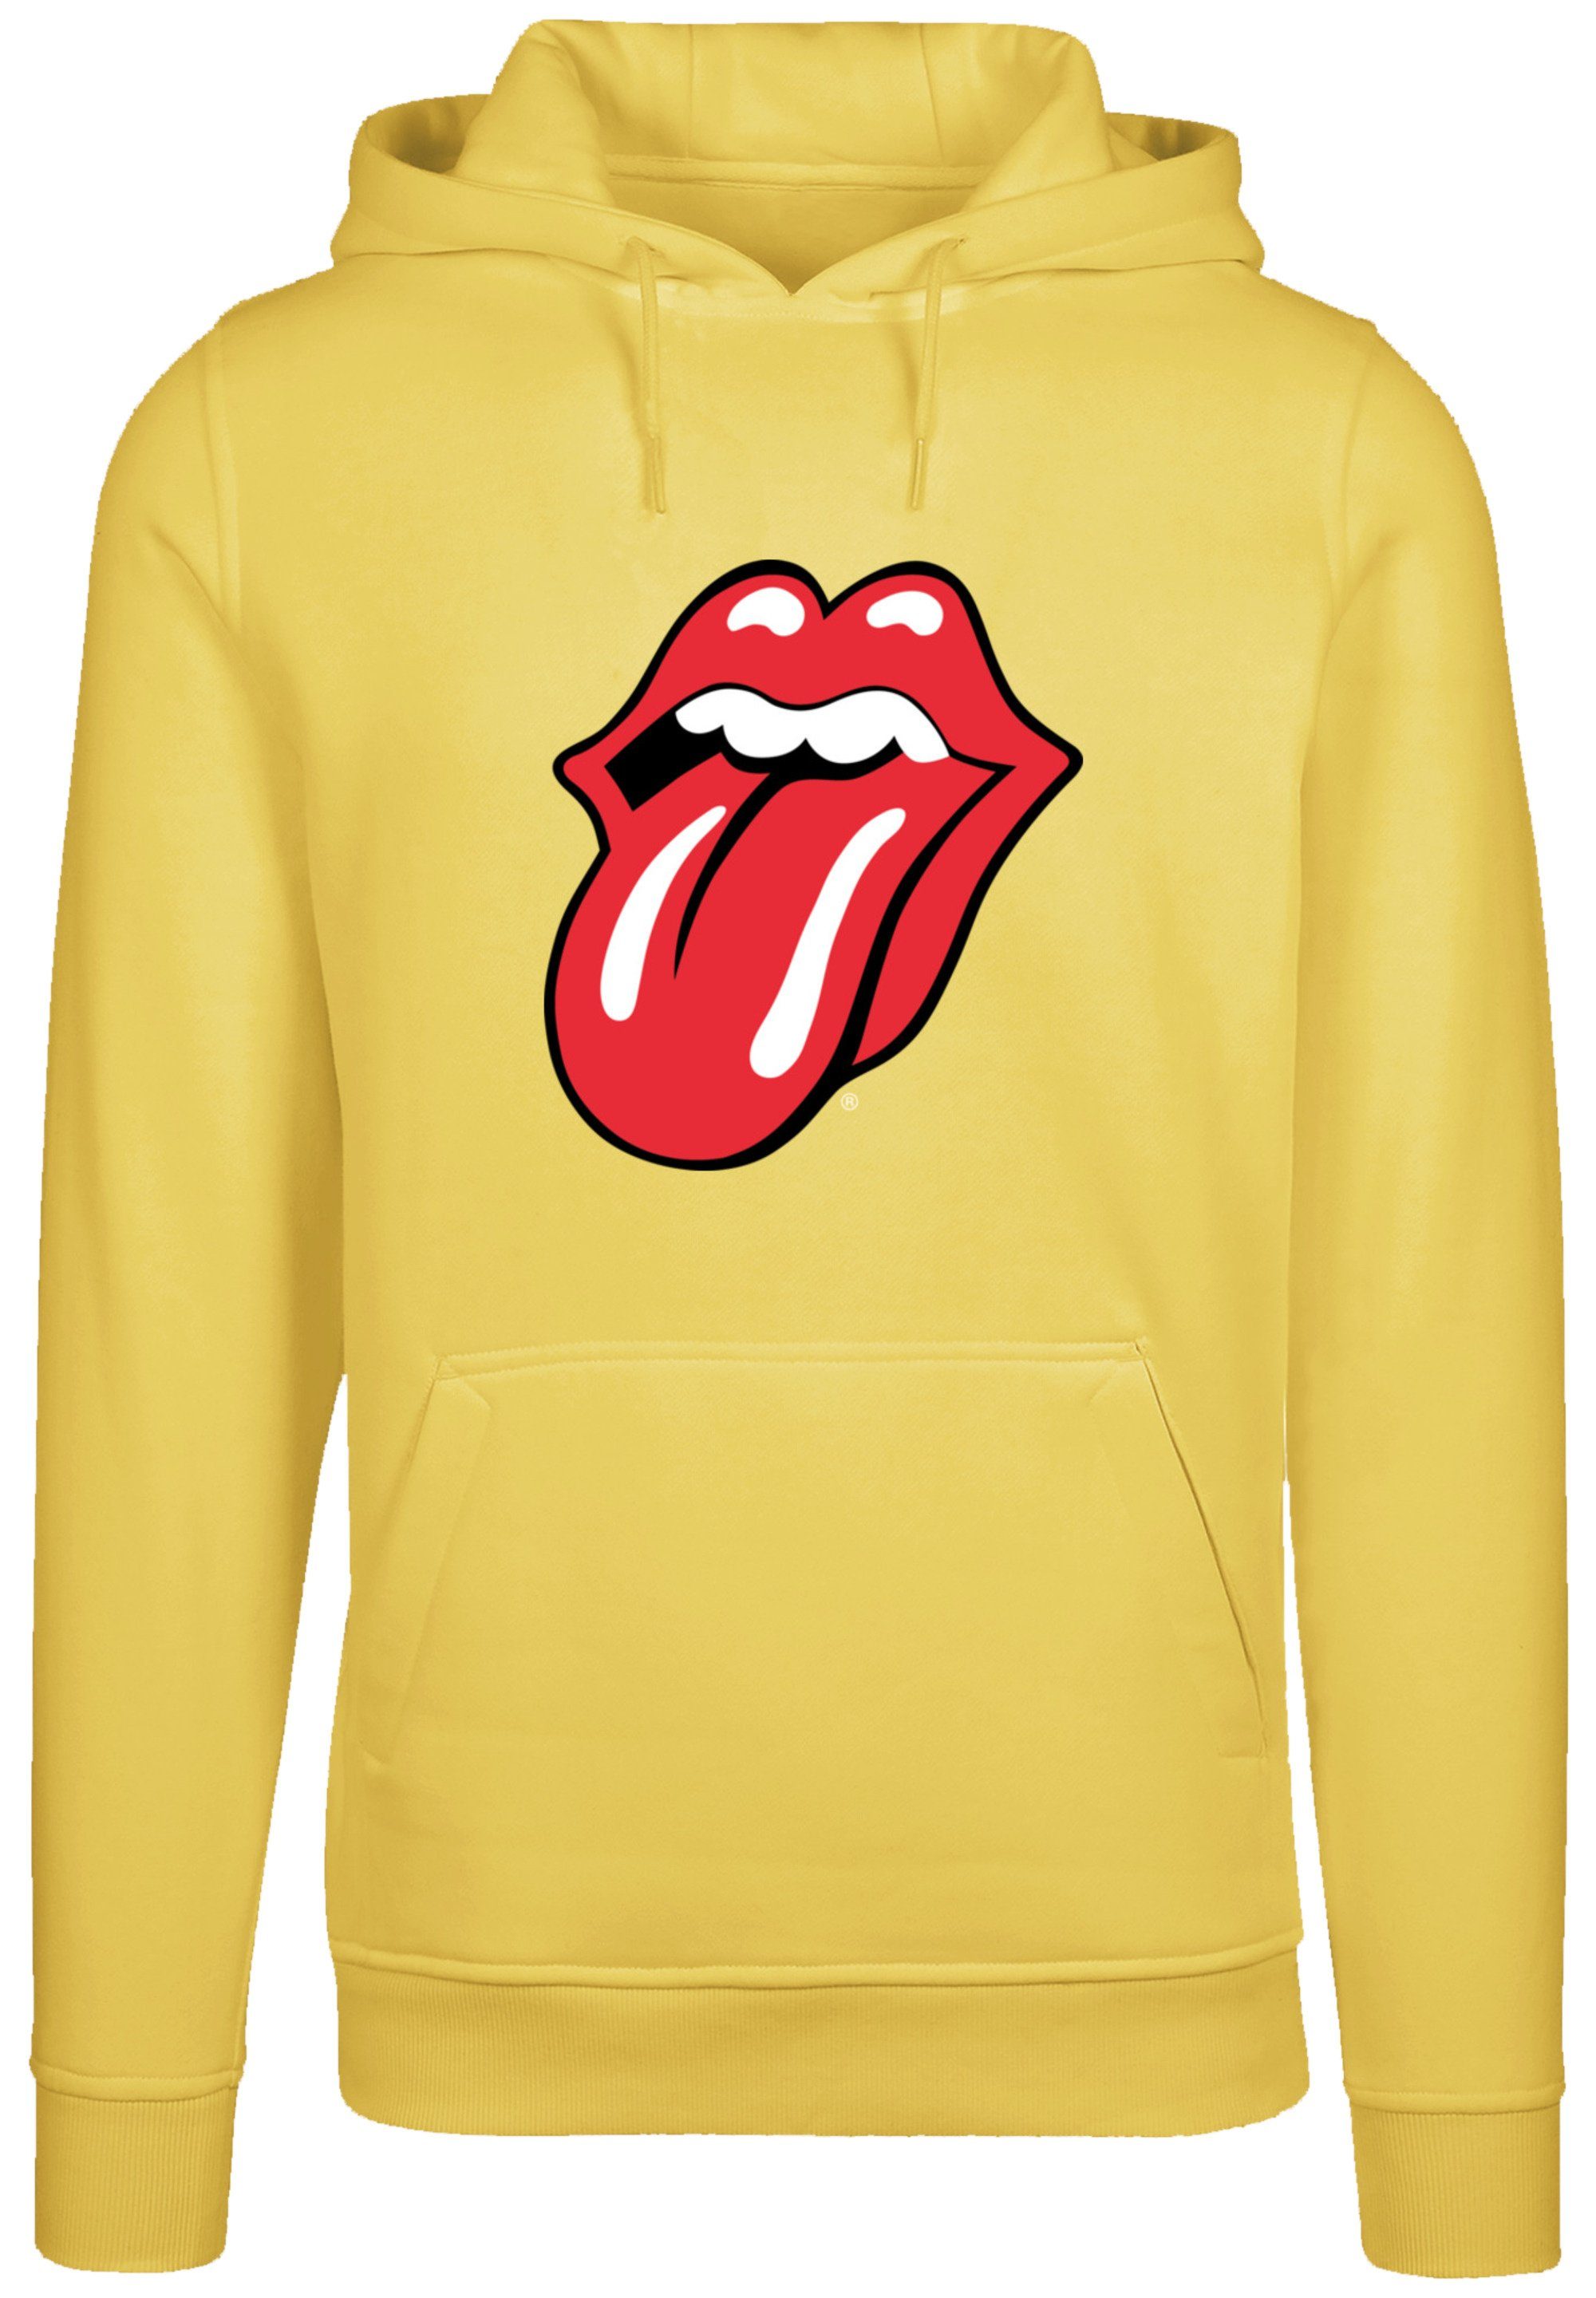 The Band Rock Hoodie, Bequem F4NT4STIC Classic Warm, taxi Zunge yellow Stones Musik Rolling Kapuzenpullover